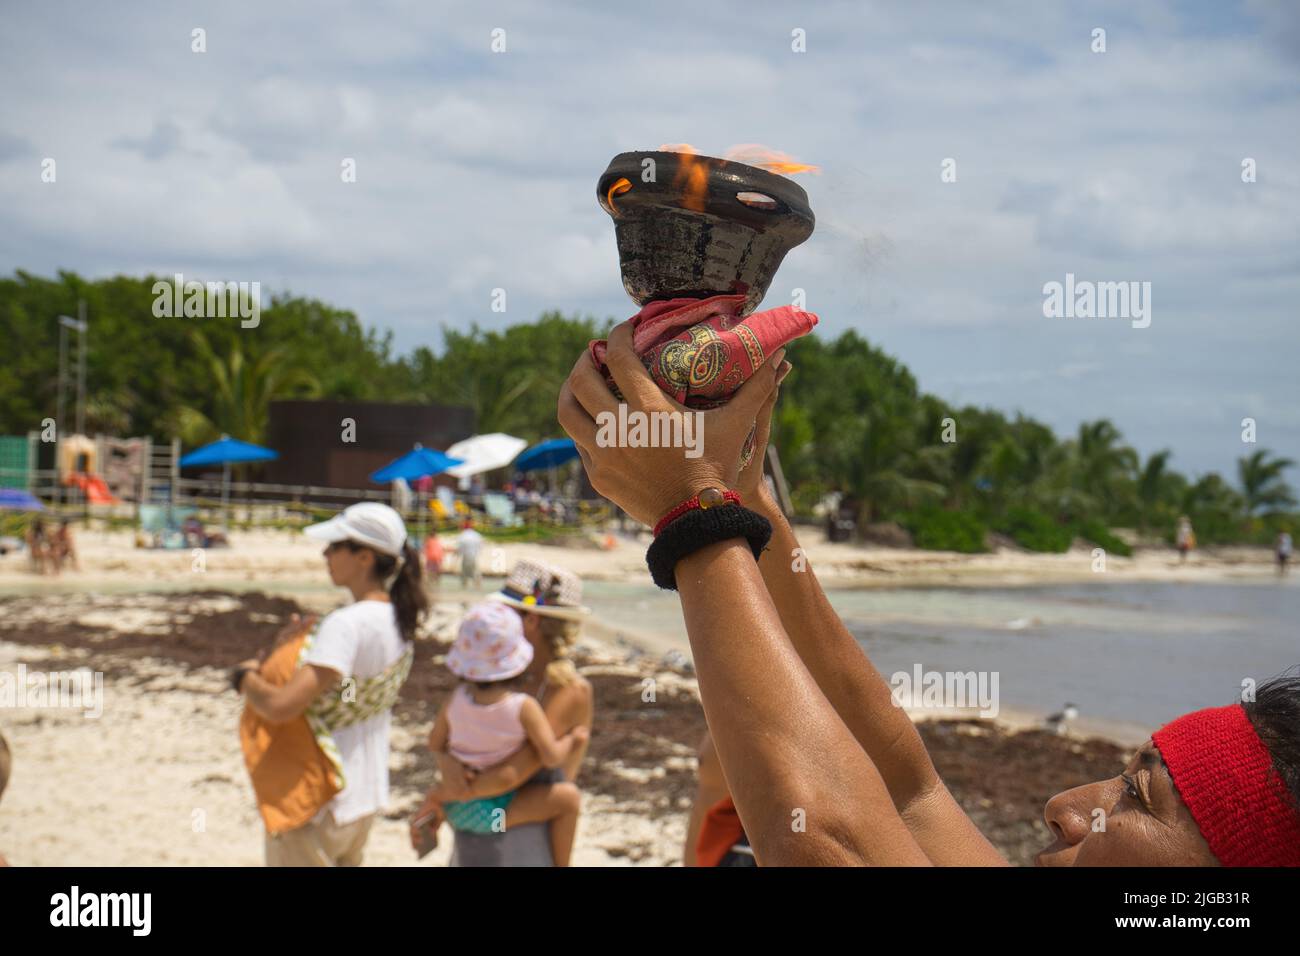 Latina woman with arms raised in a ceremony and a lit brazier in her hands at the beach in Mexico Stock Photo